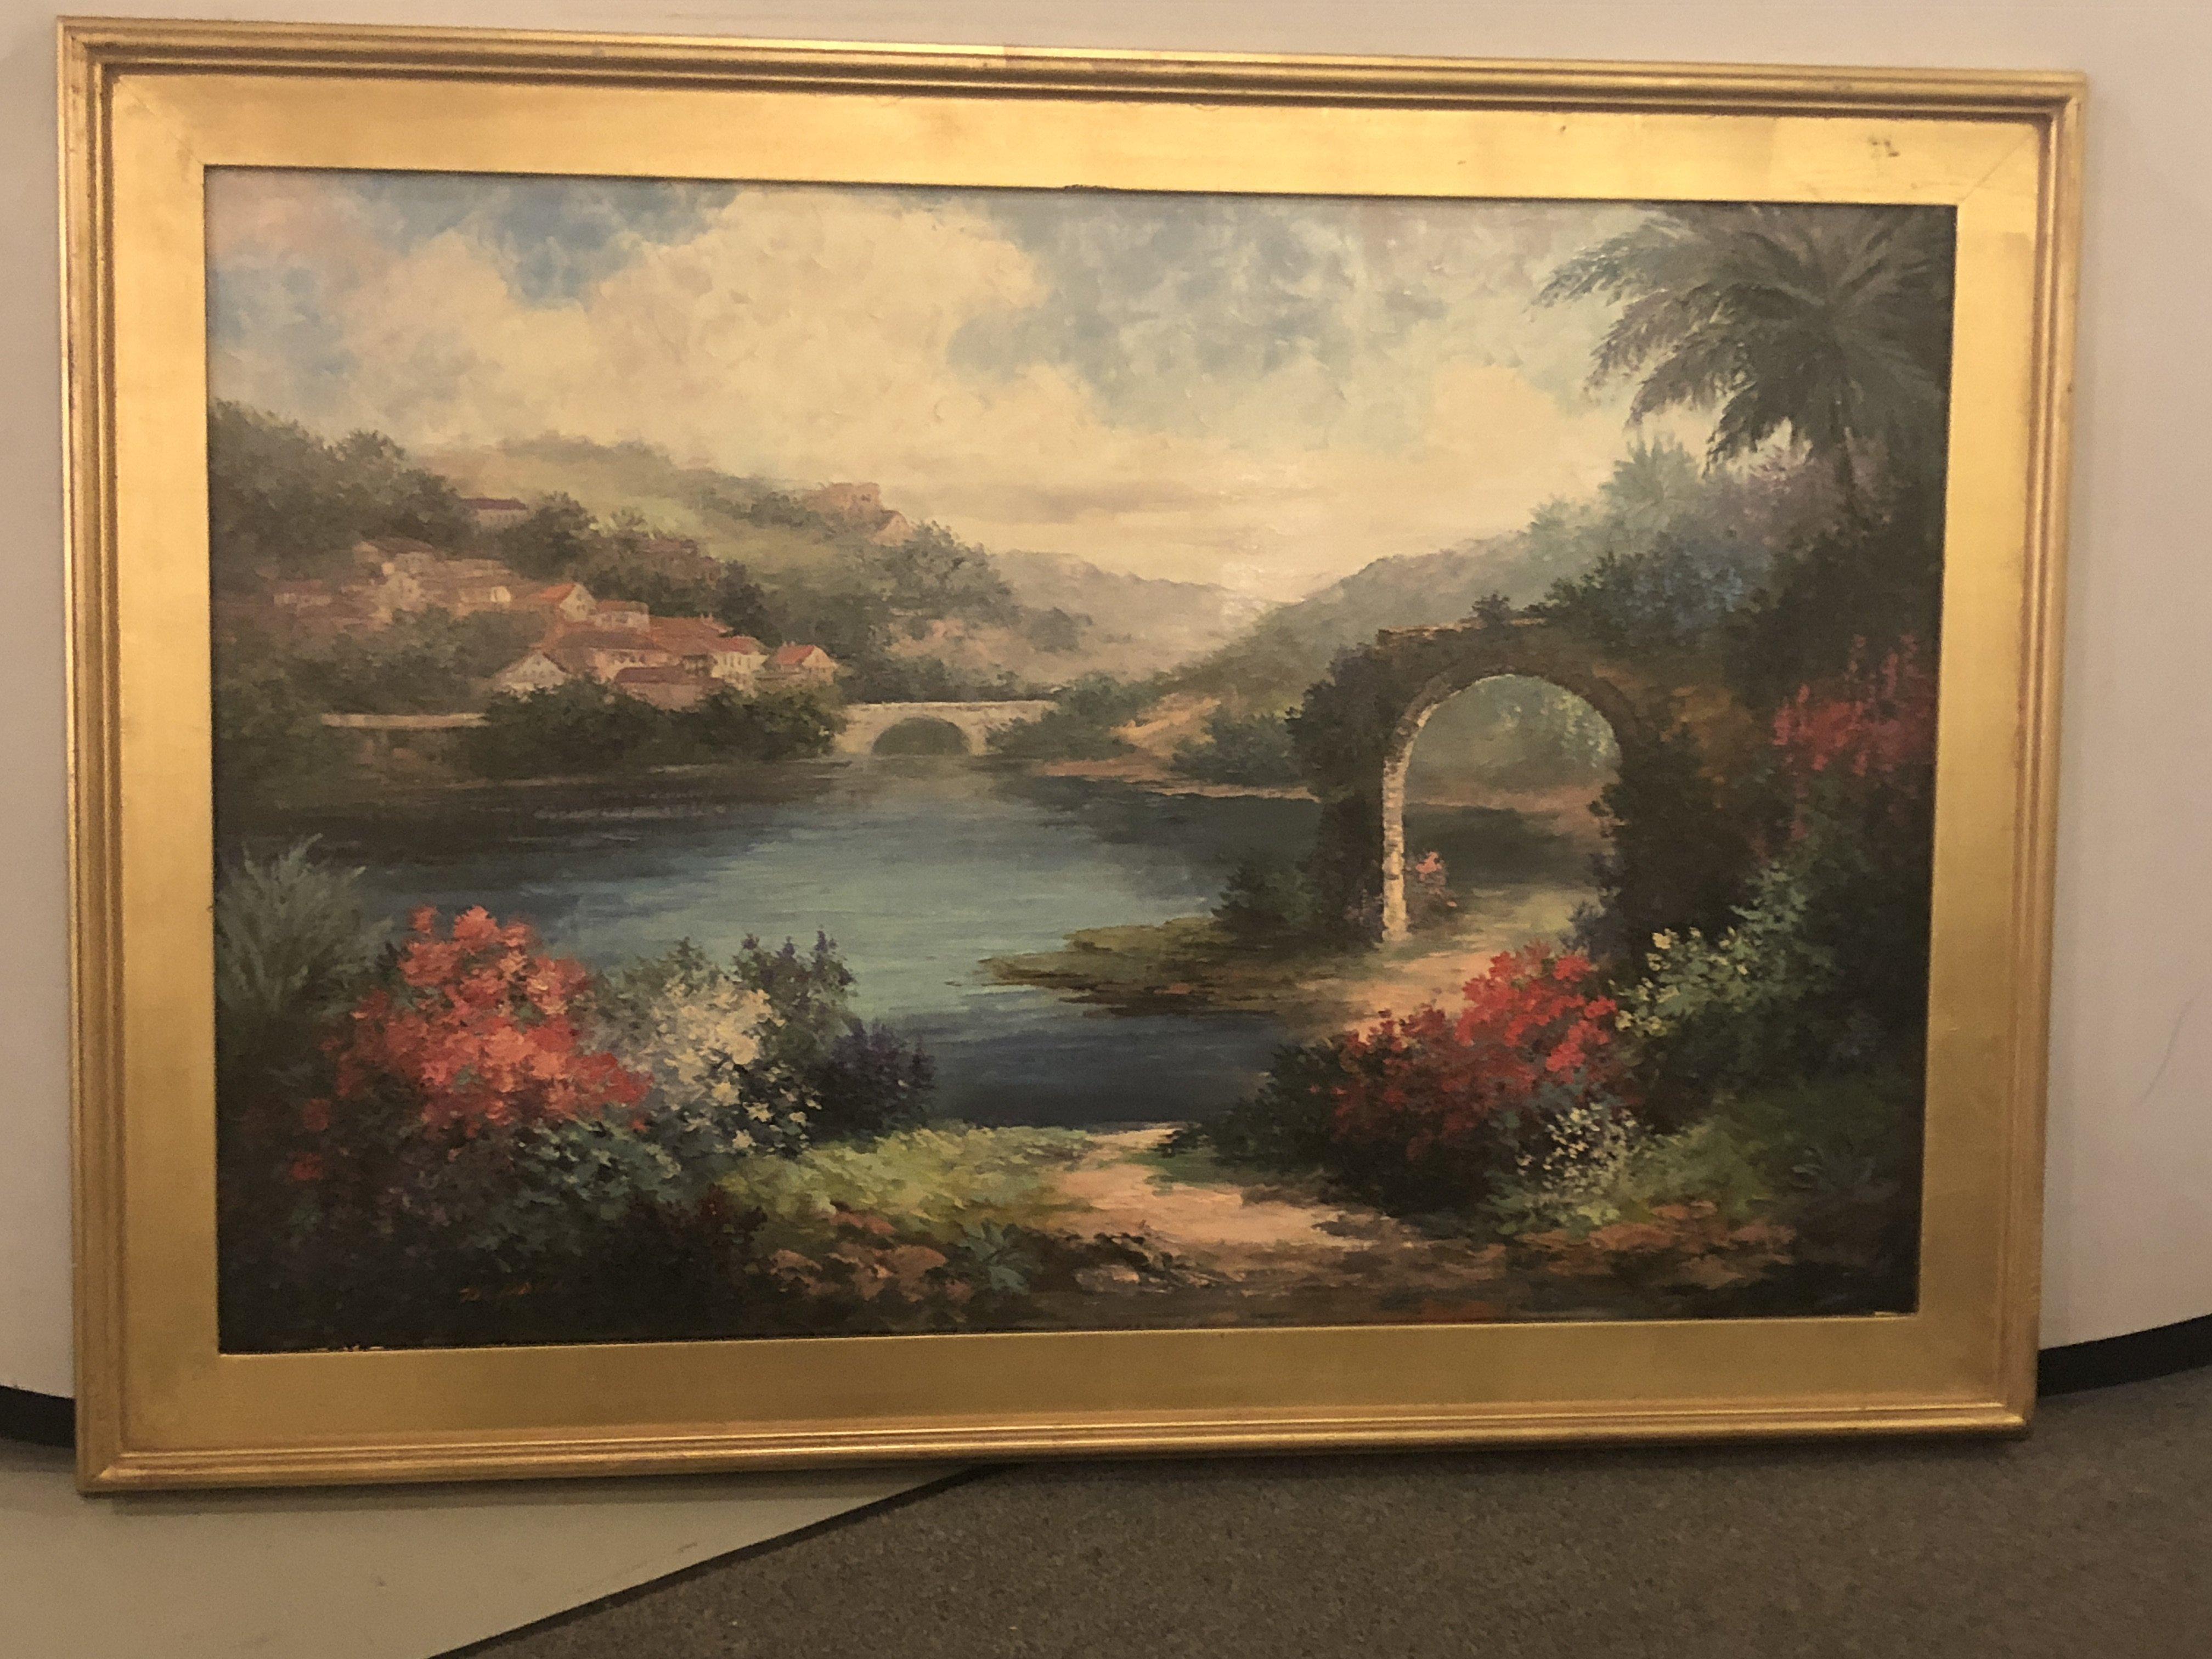 An elegant oil on canvas landscape painting featuring a lake view in a paradisiac environment. The painting is finely framed in custom giltwood frame. A wonderful addition to any living space or office. The painting is signed by artist, P. Paul